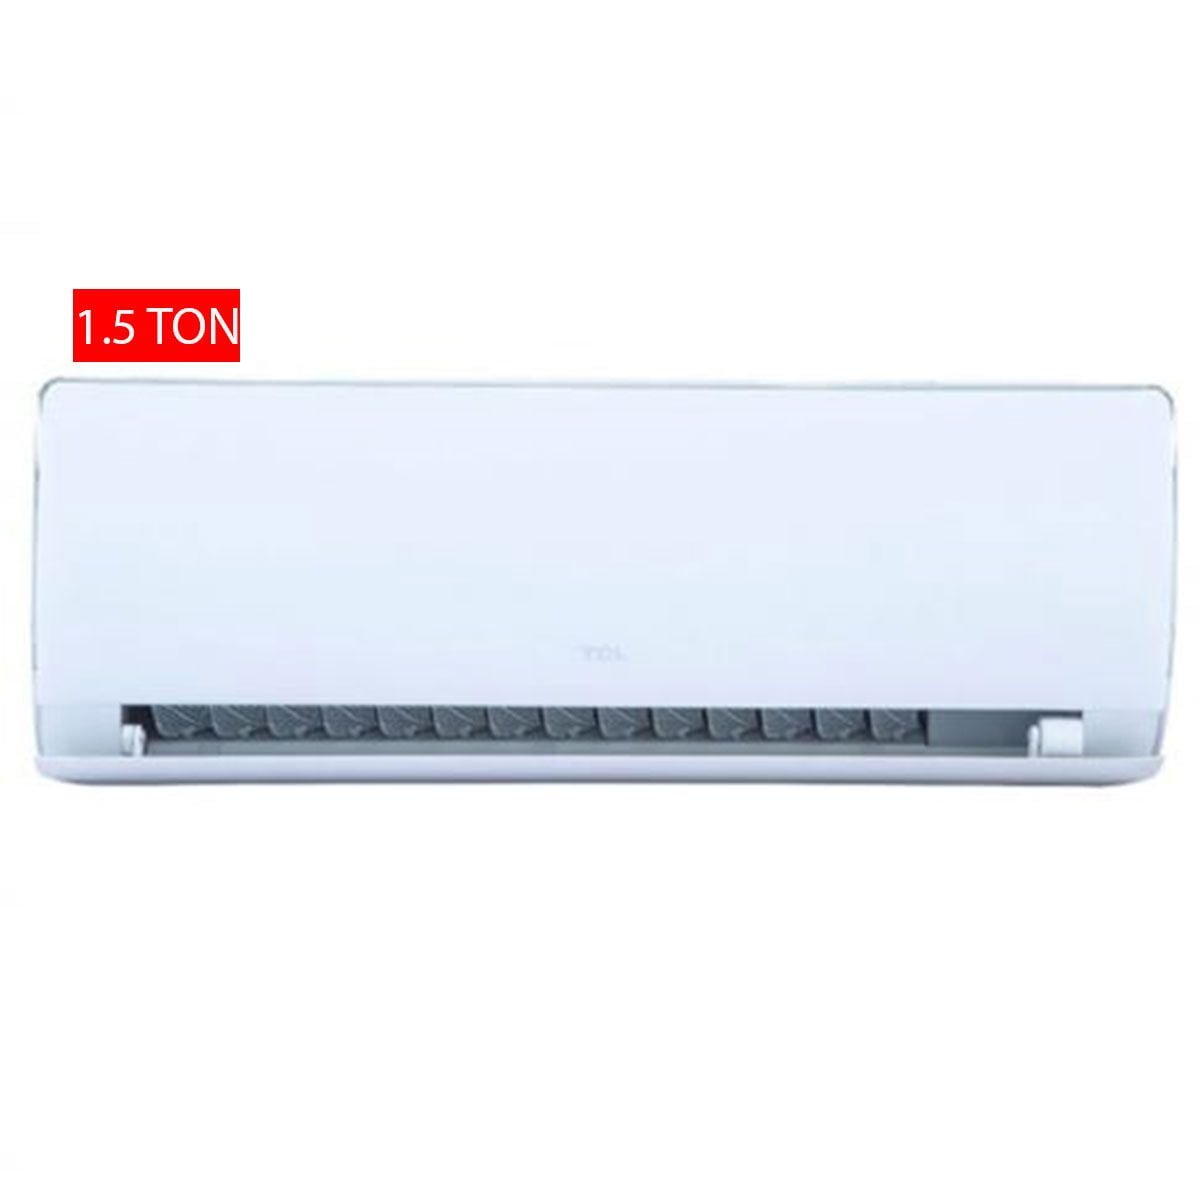 TCL Miracle Inverter AC TAC-18TS 1.5 Ton Efficient Cooling and Advanced Features